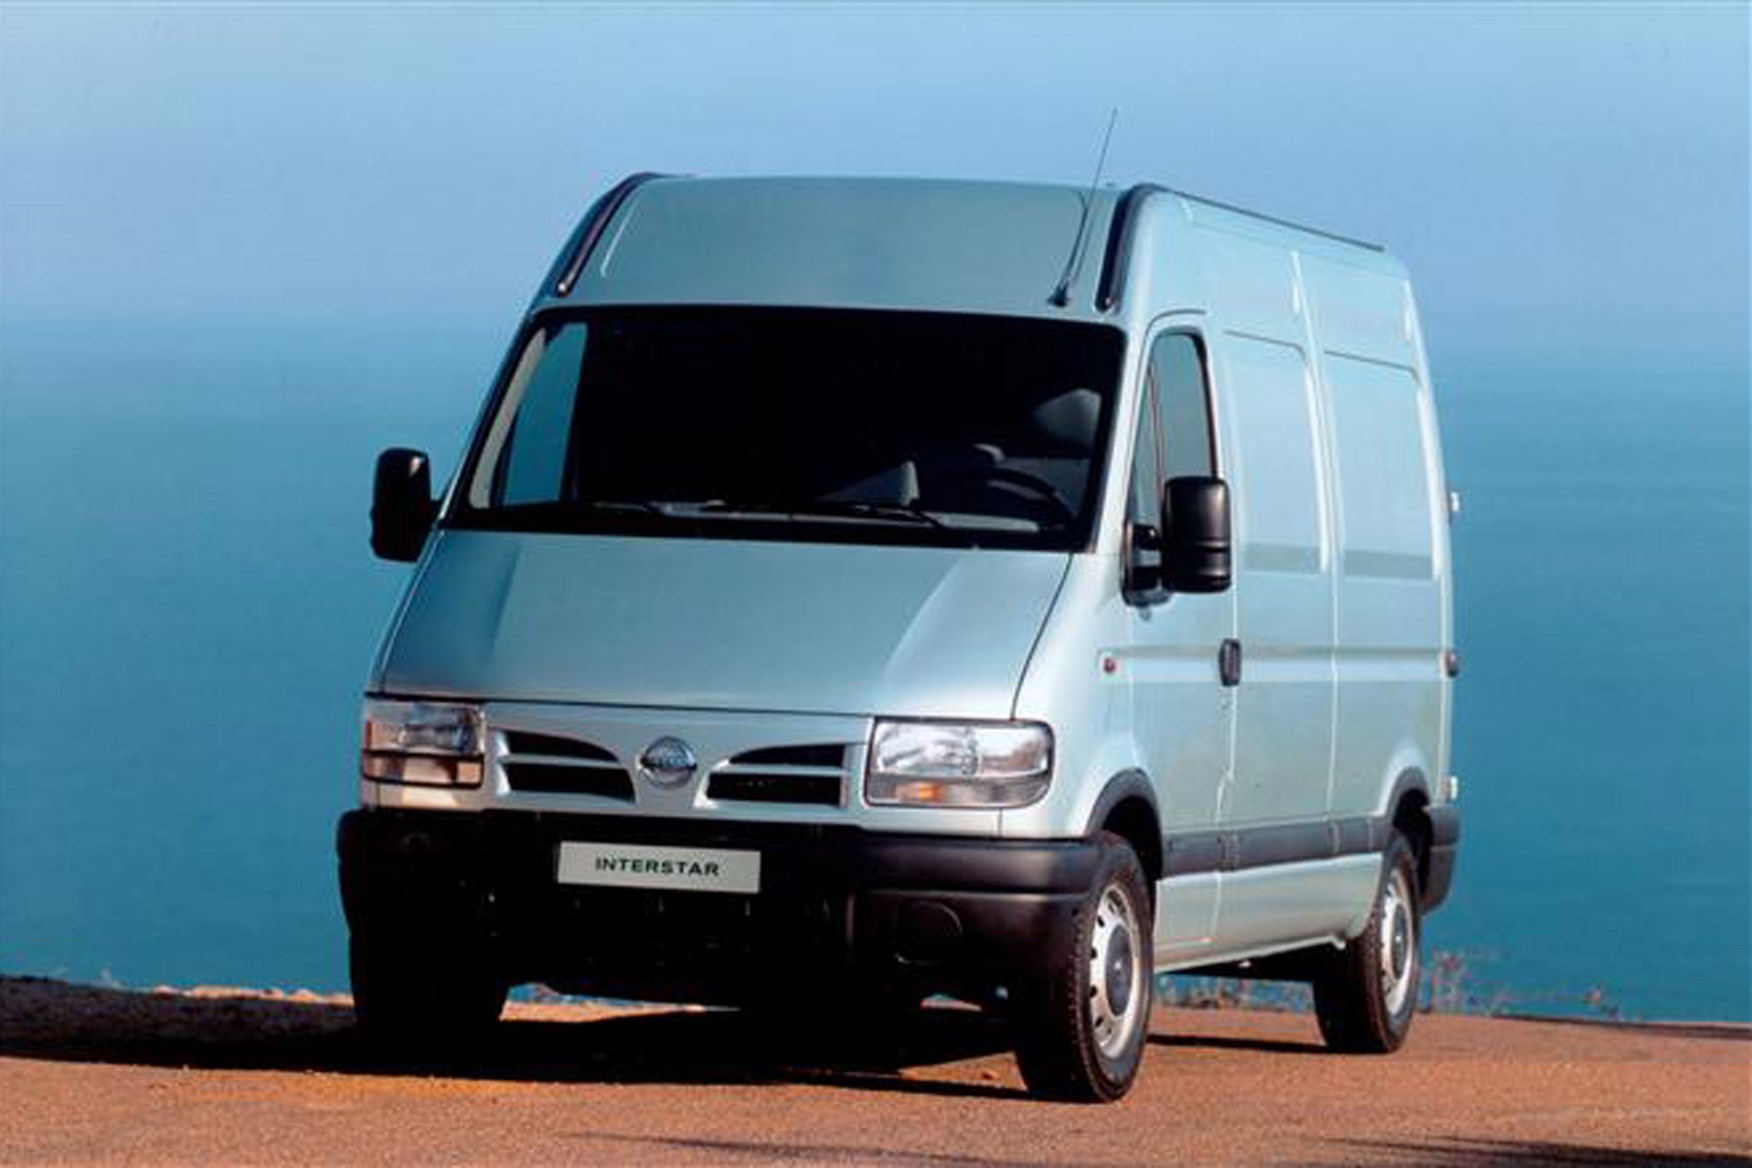 Nissan Interstar review on Parkers Vans - front exterior